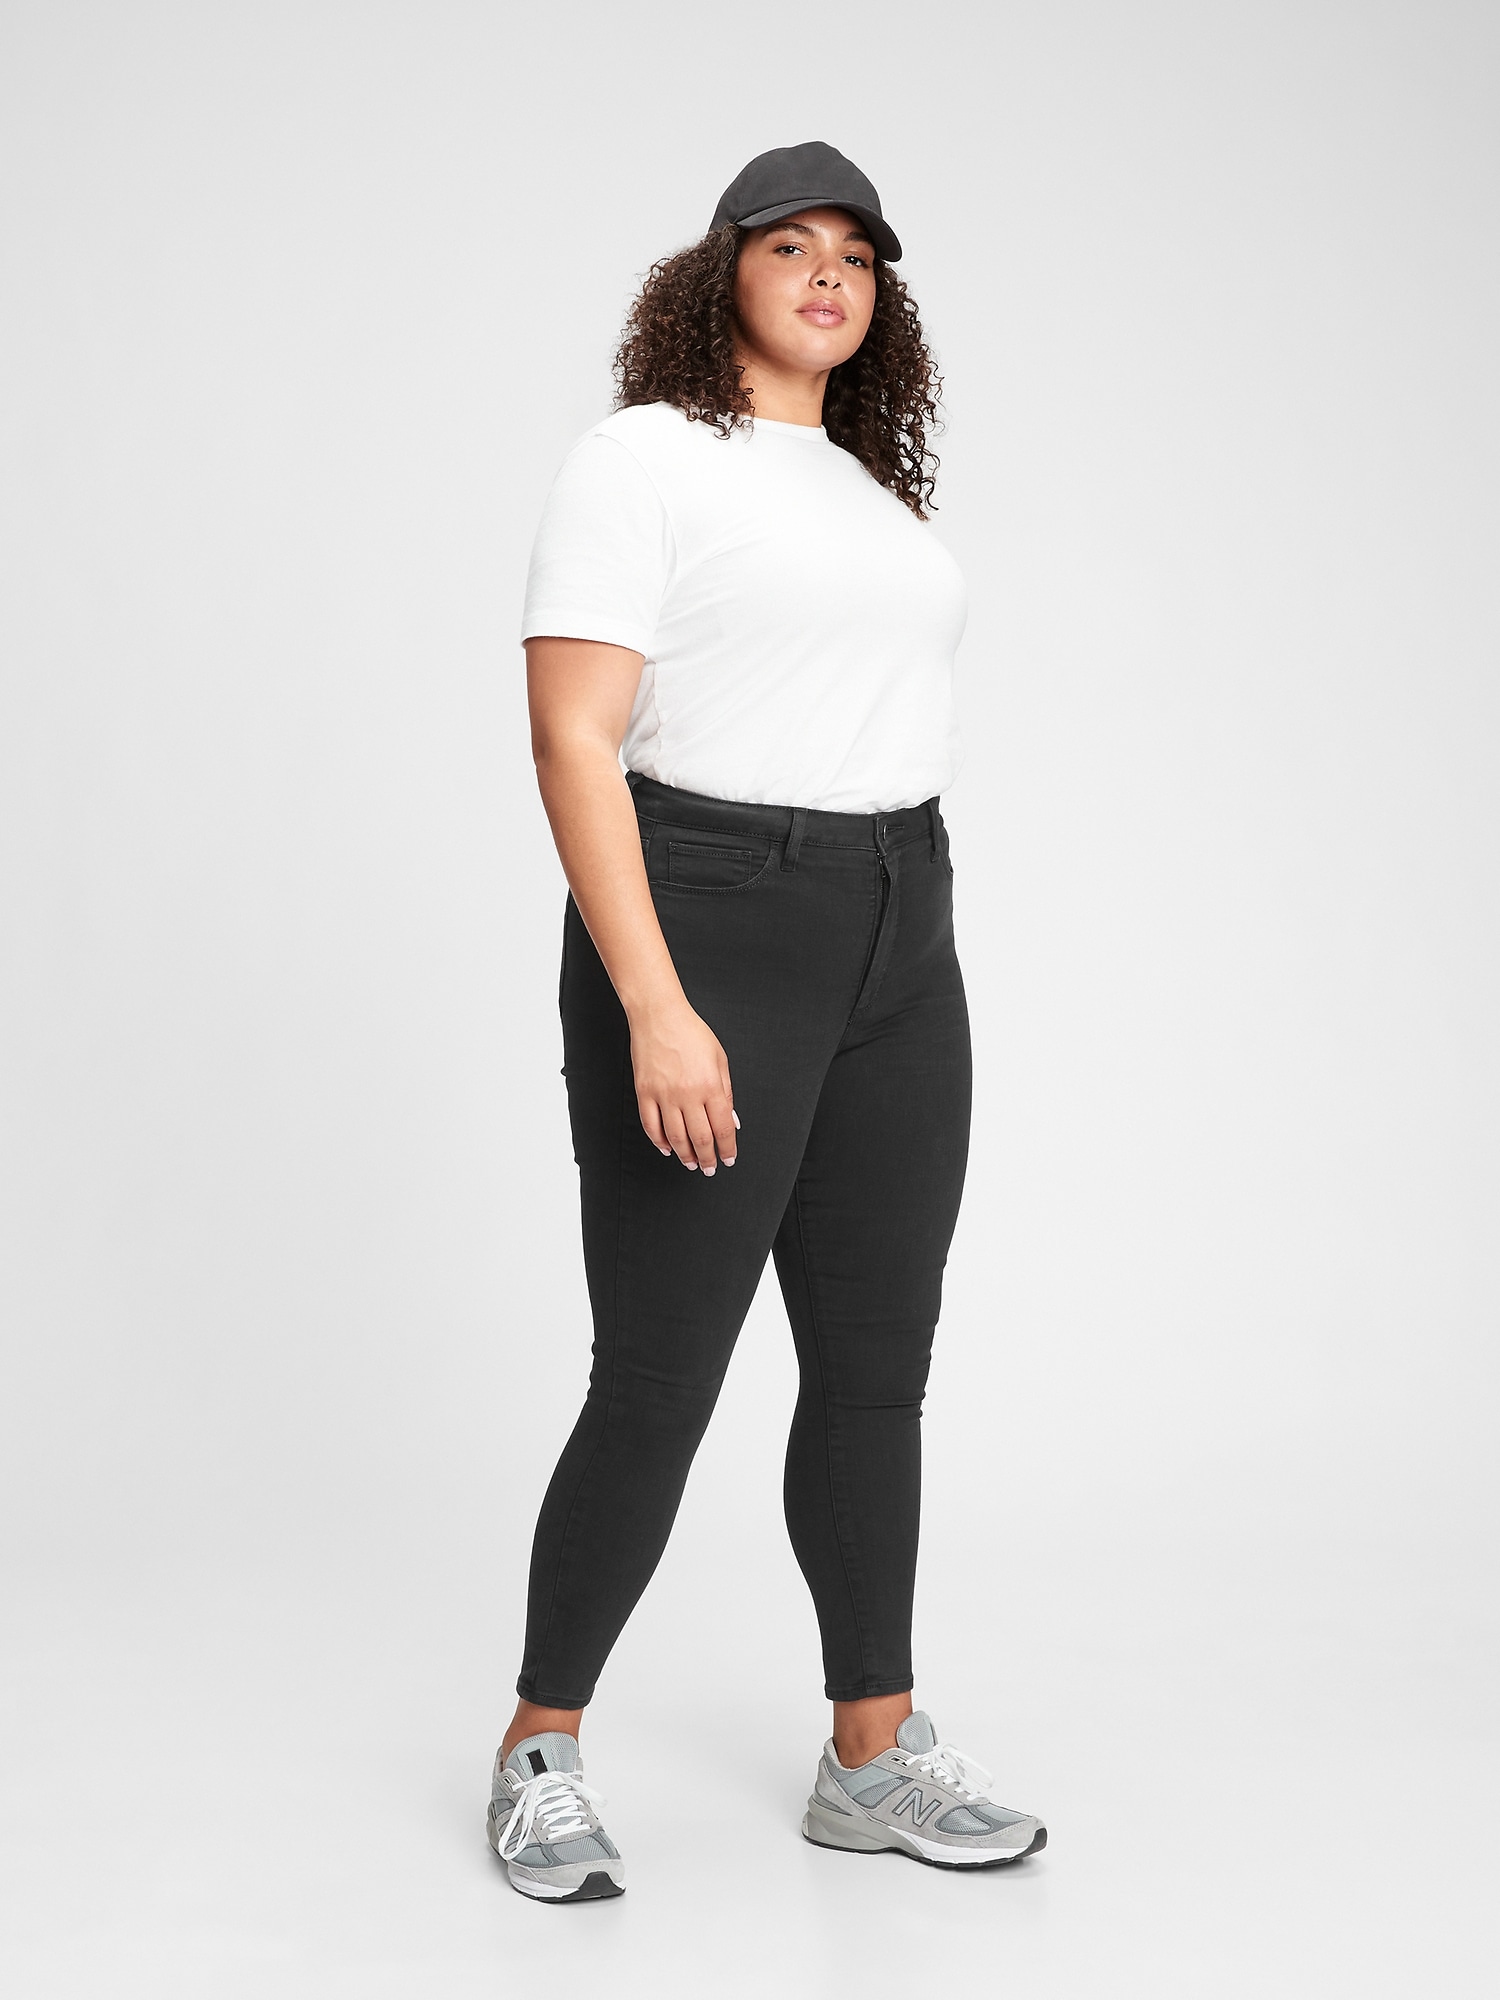 Gap - Introducing the new Universal Jegging. Flattering like denim, comfy like  leggings, and designed to look great on every. single. body. Discover your  new favourite denim, now available in sizes 2-24